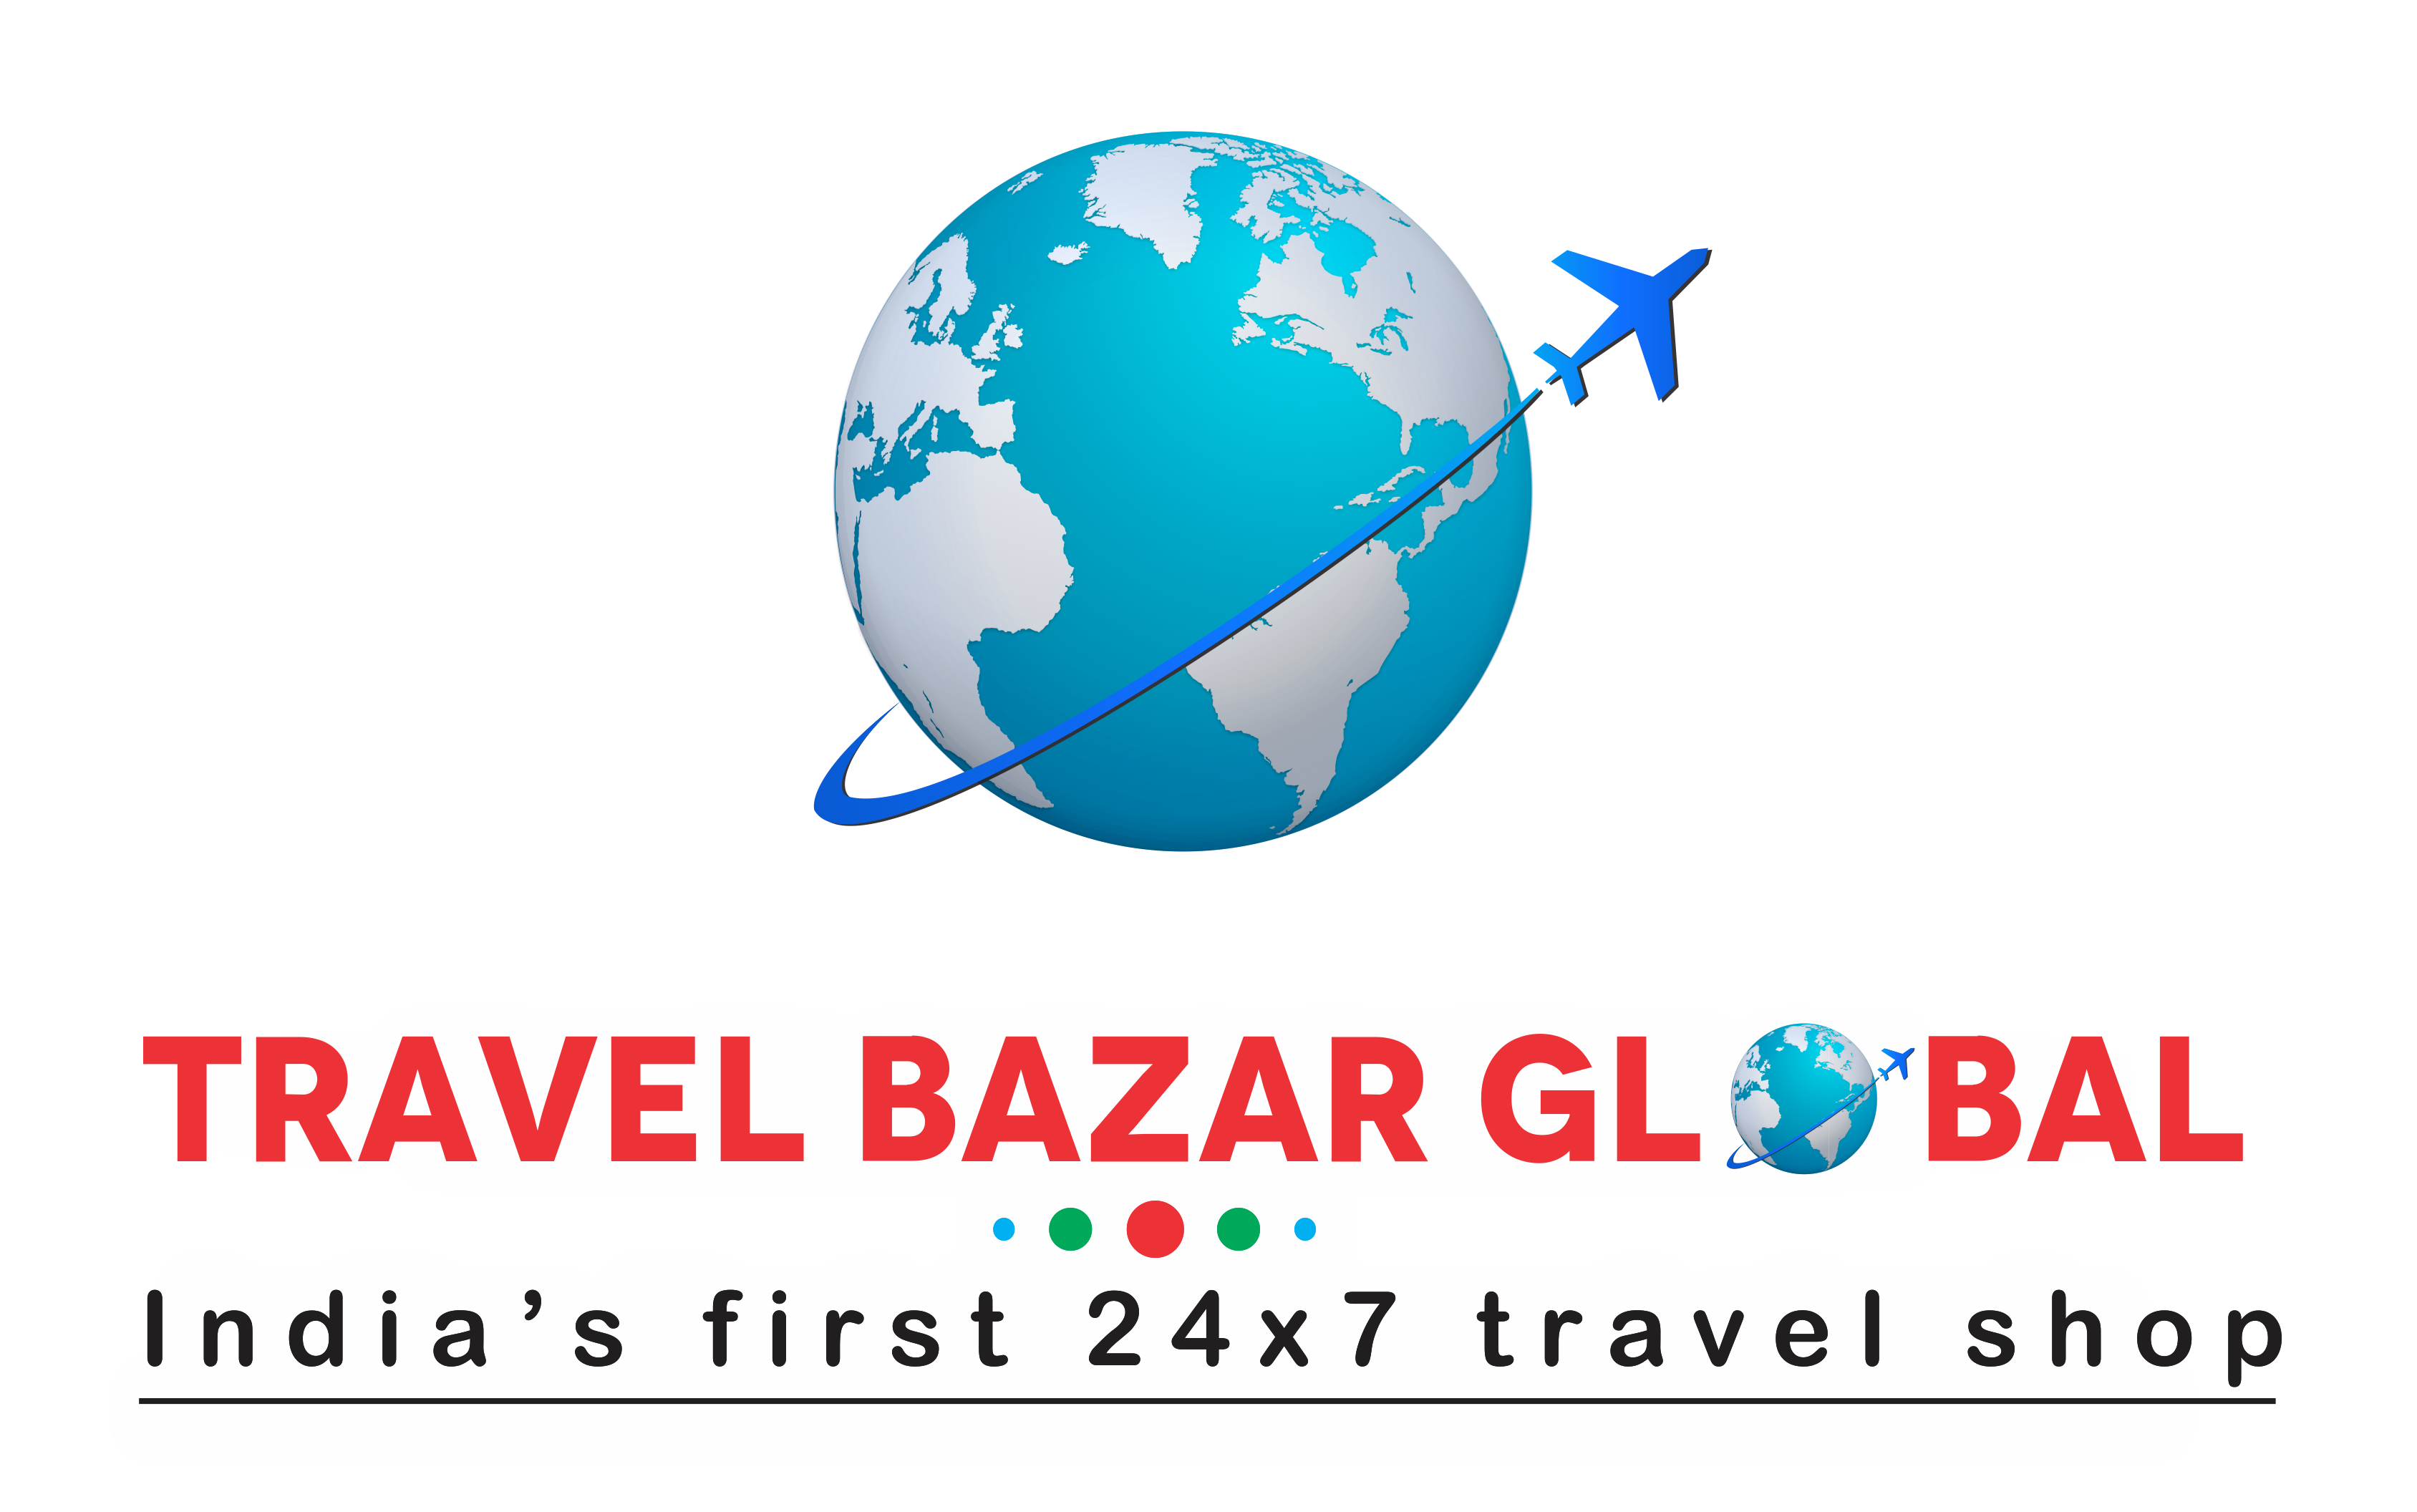 India's First 24x7 Travel Shop